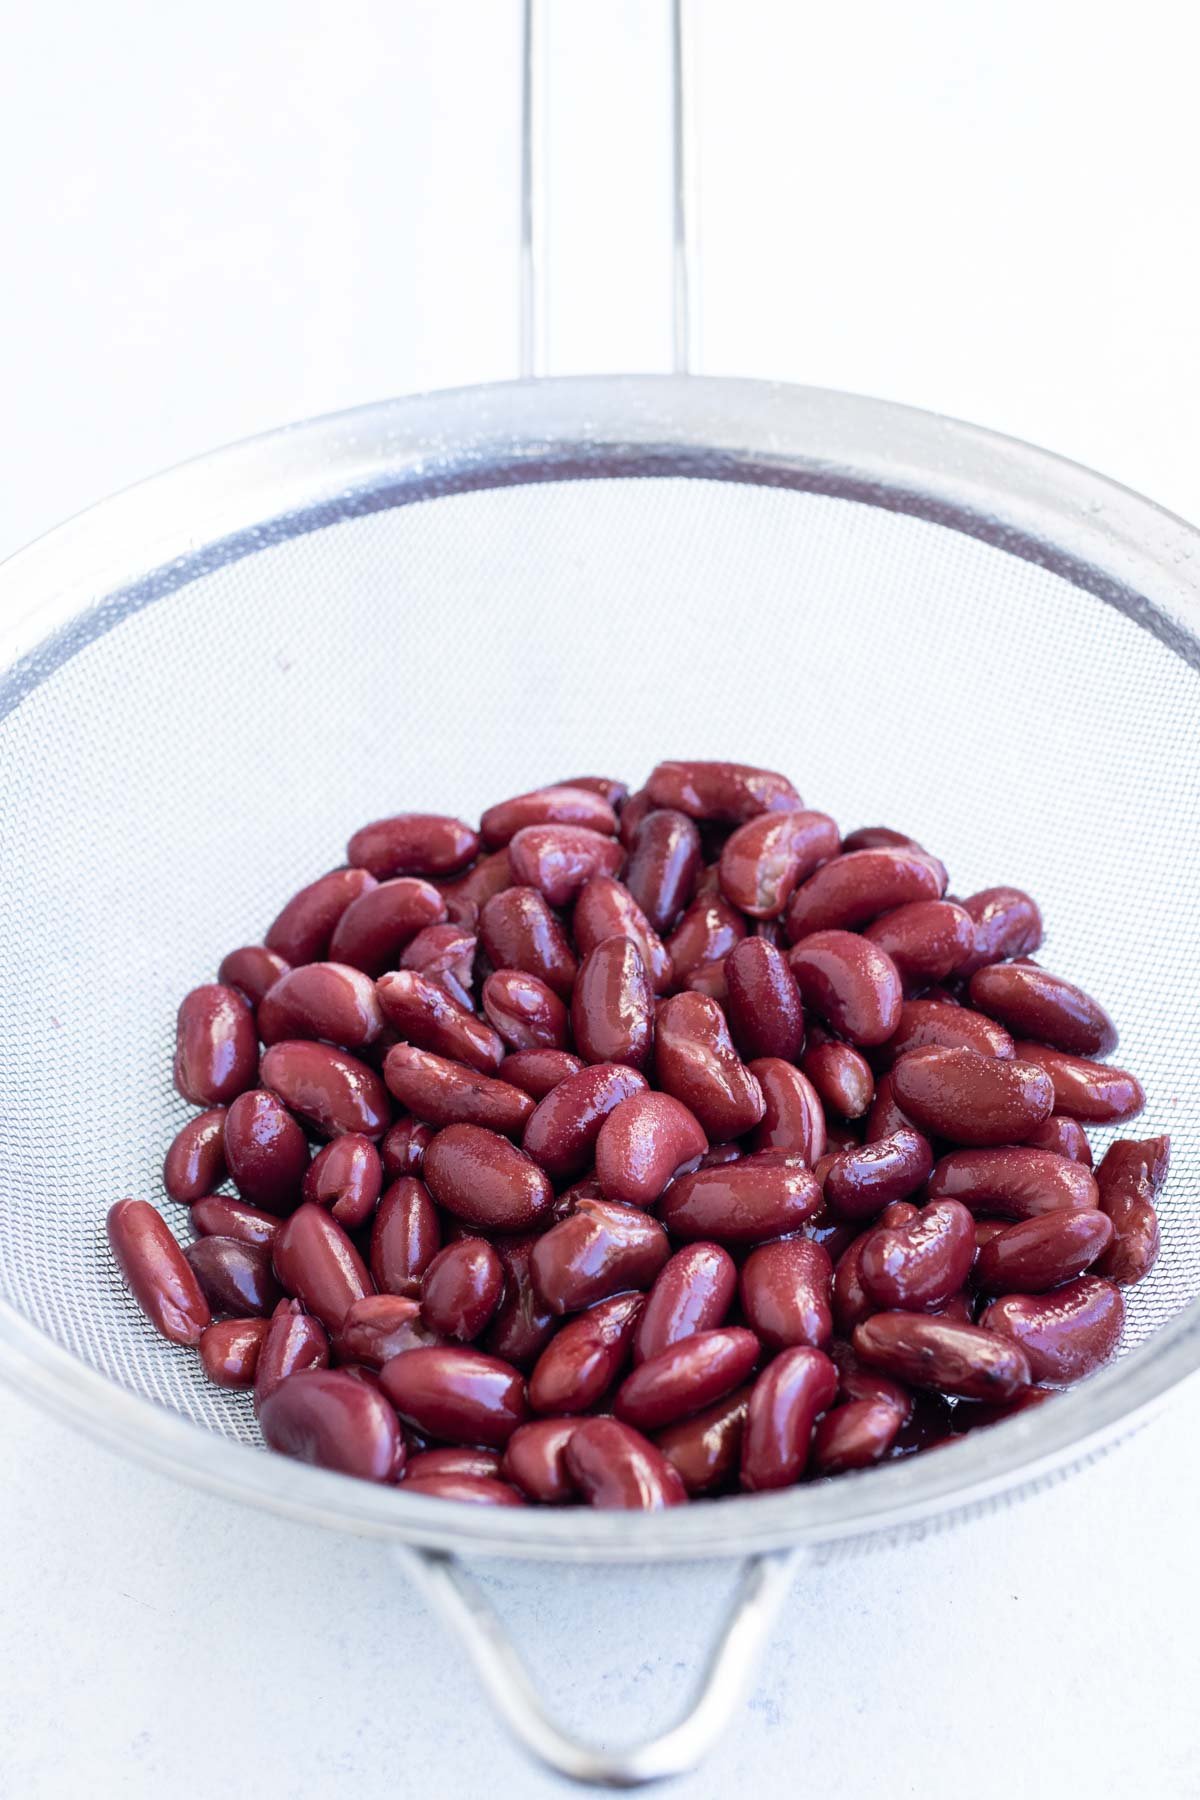 Kidney beans are drained.